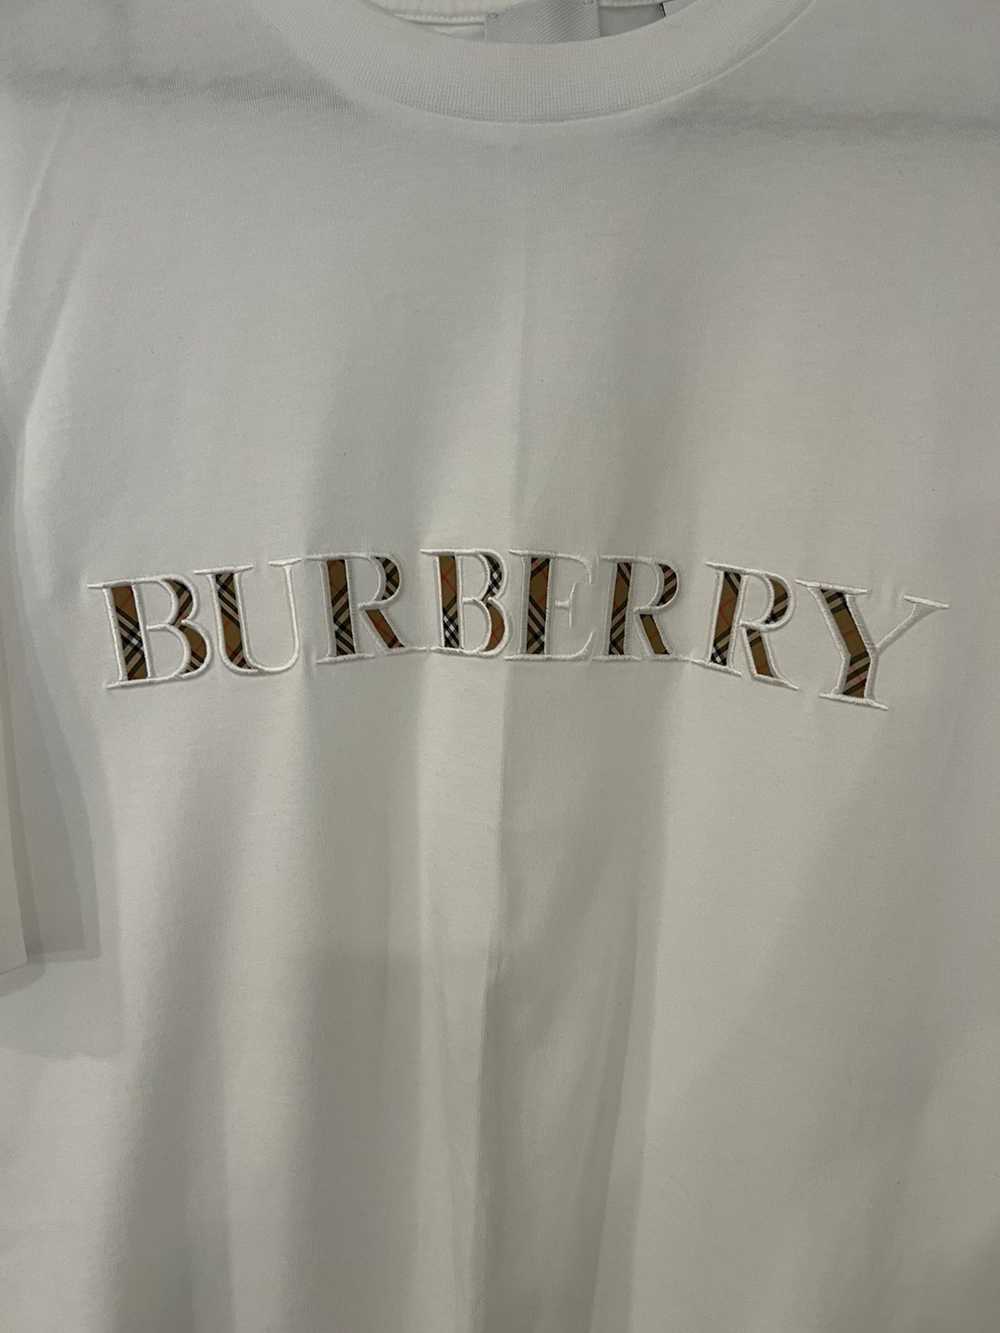 Burberry Burberry t shirt dry clean no stains wor… - image 2